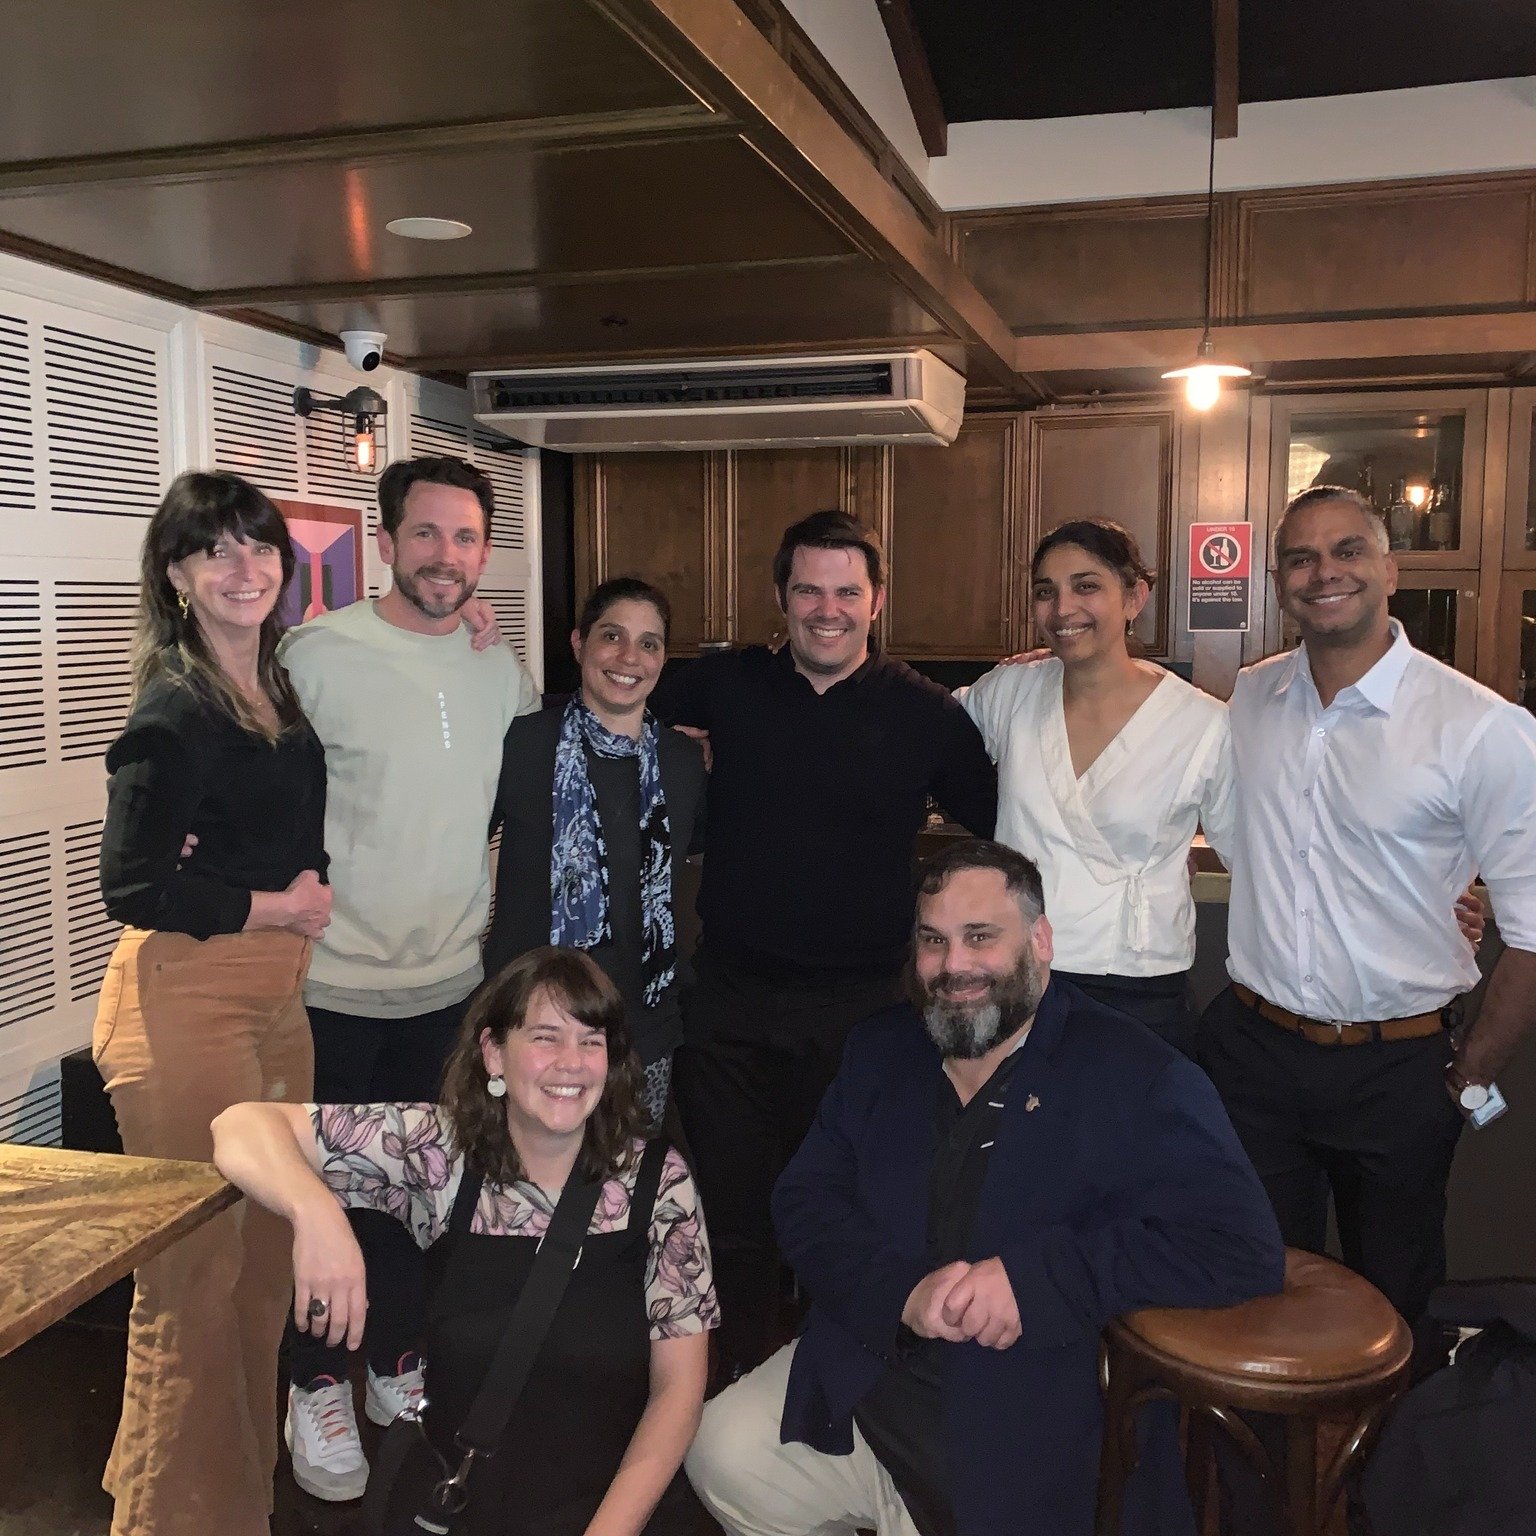 We had an amazing time hosting our second regional dinner for Senior Fellows in Sydney this week! It was inspiring to see Fellows from various cohorts come together, sharing insights and forging new connections.

Watching these relationships gain mom